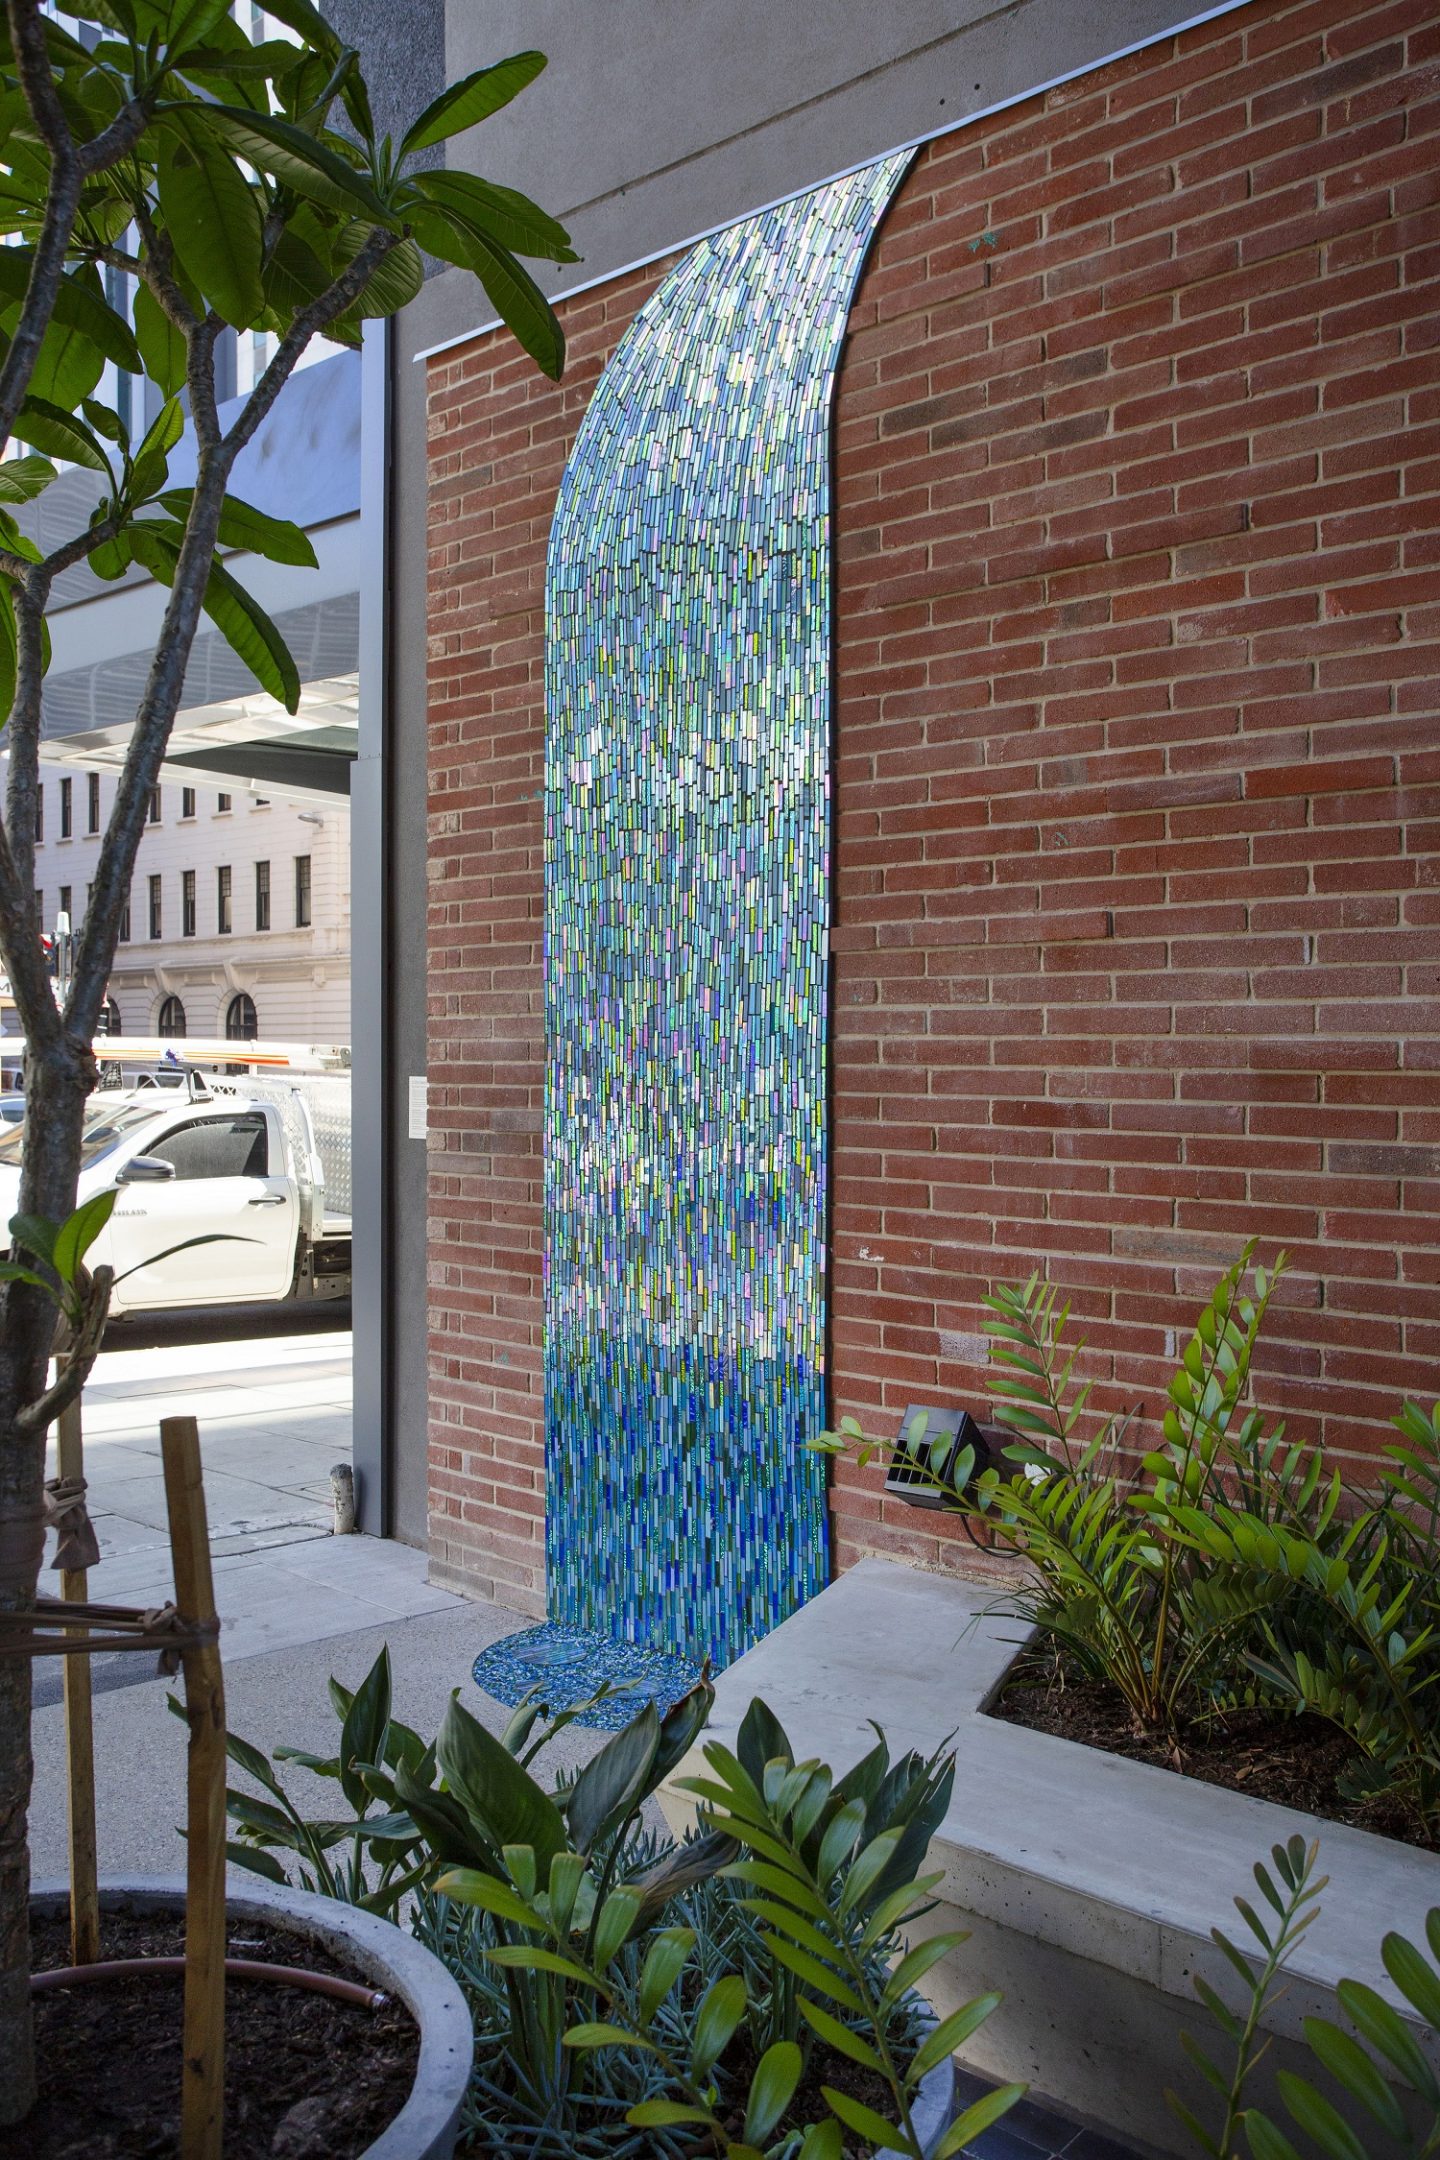 Aurelia Carbone, Welcome Waterfall, part of City Sanctuary, 2019. Made in collaboration with Violet Cooper. Commissioned by Uniting Communities with support from Guildhouse